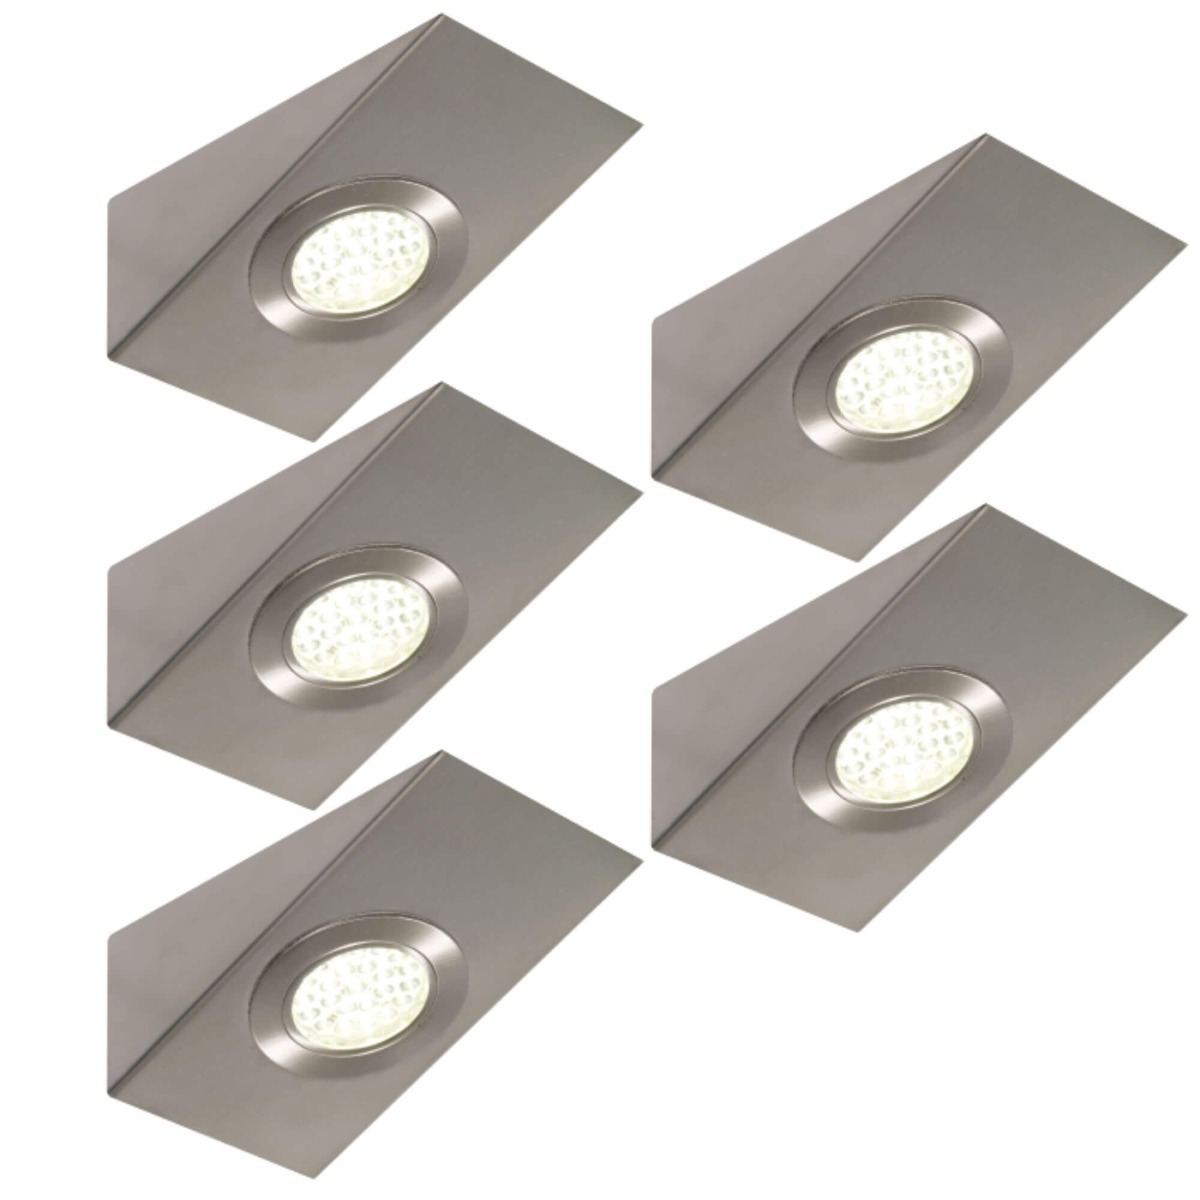 View Pack of 5 Wedge Shaped LED UnderCabinetShelf Lights Including Transformer Cool or Warm White information